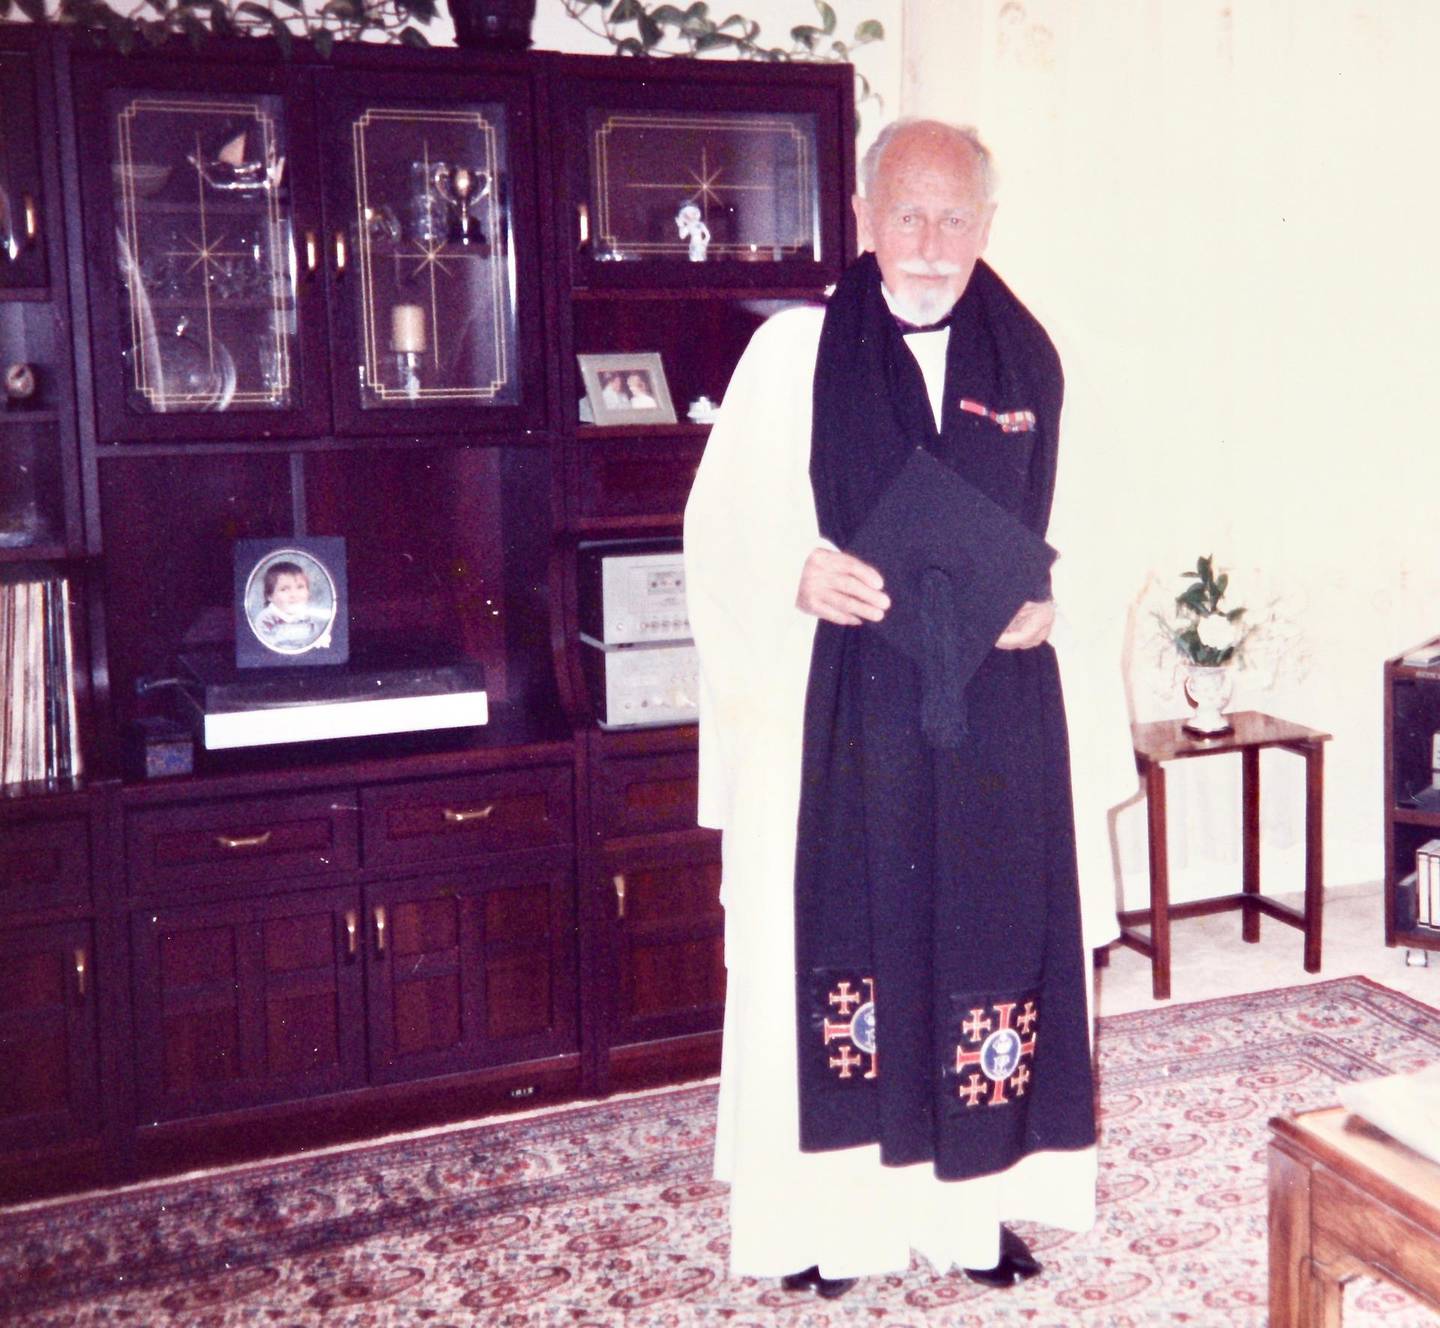 The Rev Alun Morris, vicar of St Christopher's in Bahrain who conducted the first Christian service in Abu Dhabi in December 1957 The photo was taken in 1987, near the end of his time in the Arabian Gulf. Photo: Alun Morris